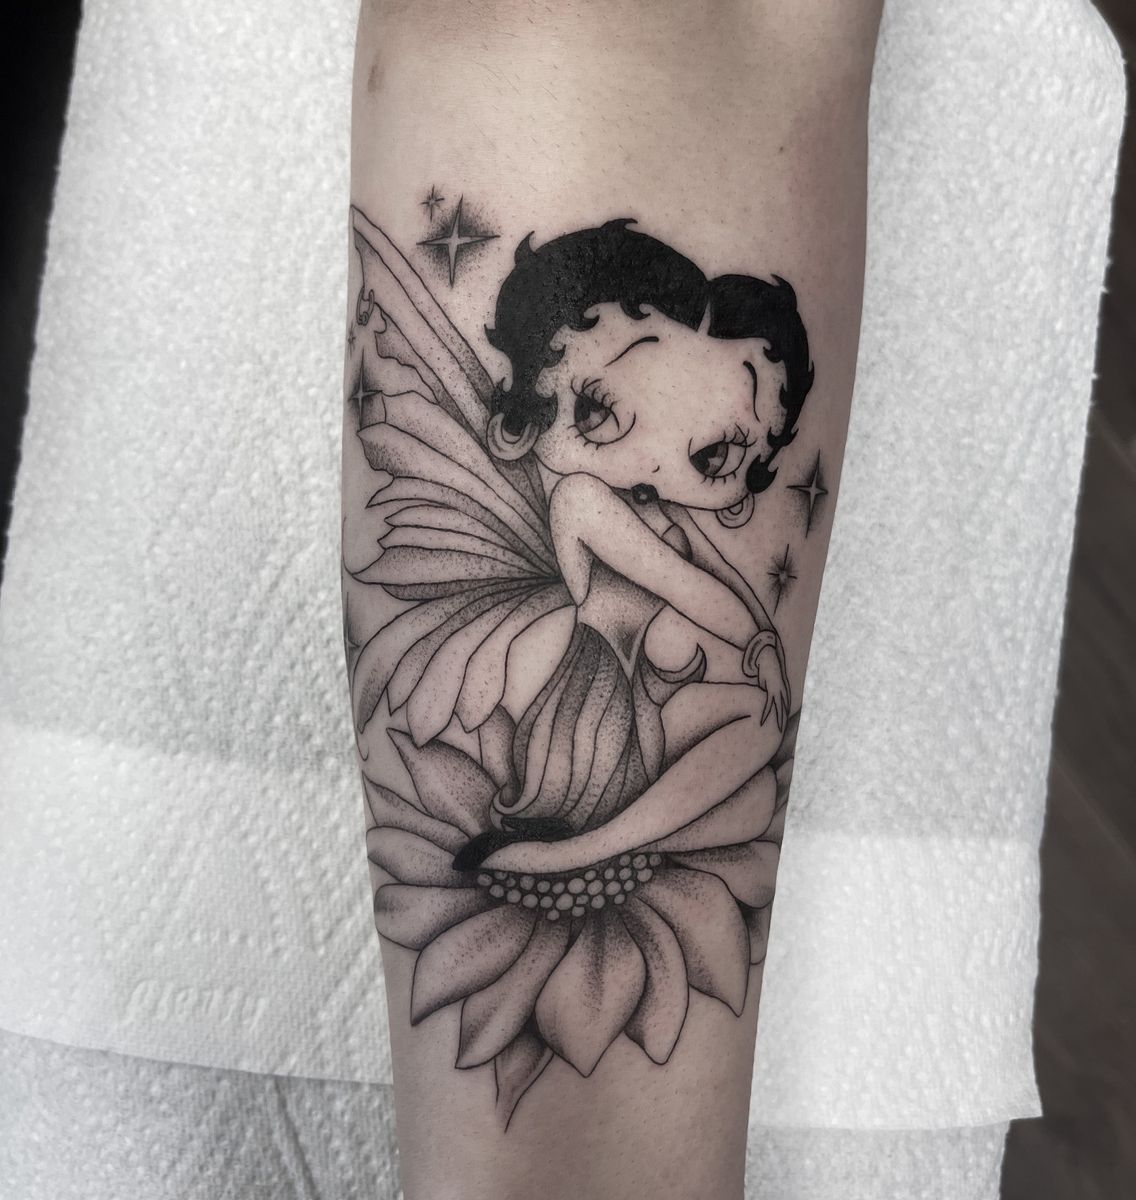 daniel whiteley recommends Betty Boop Tattoo